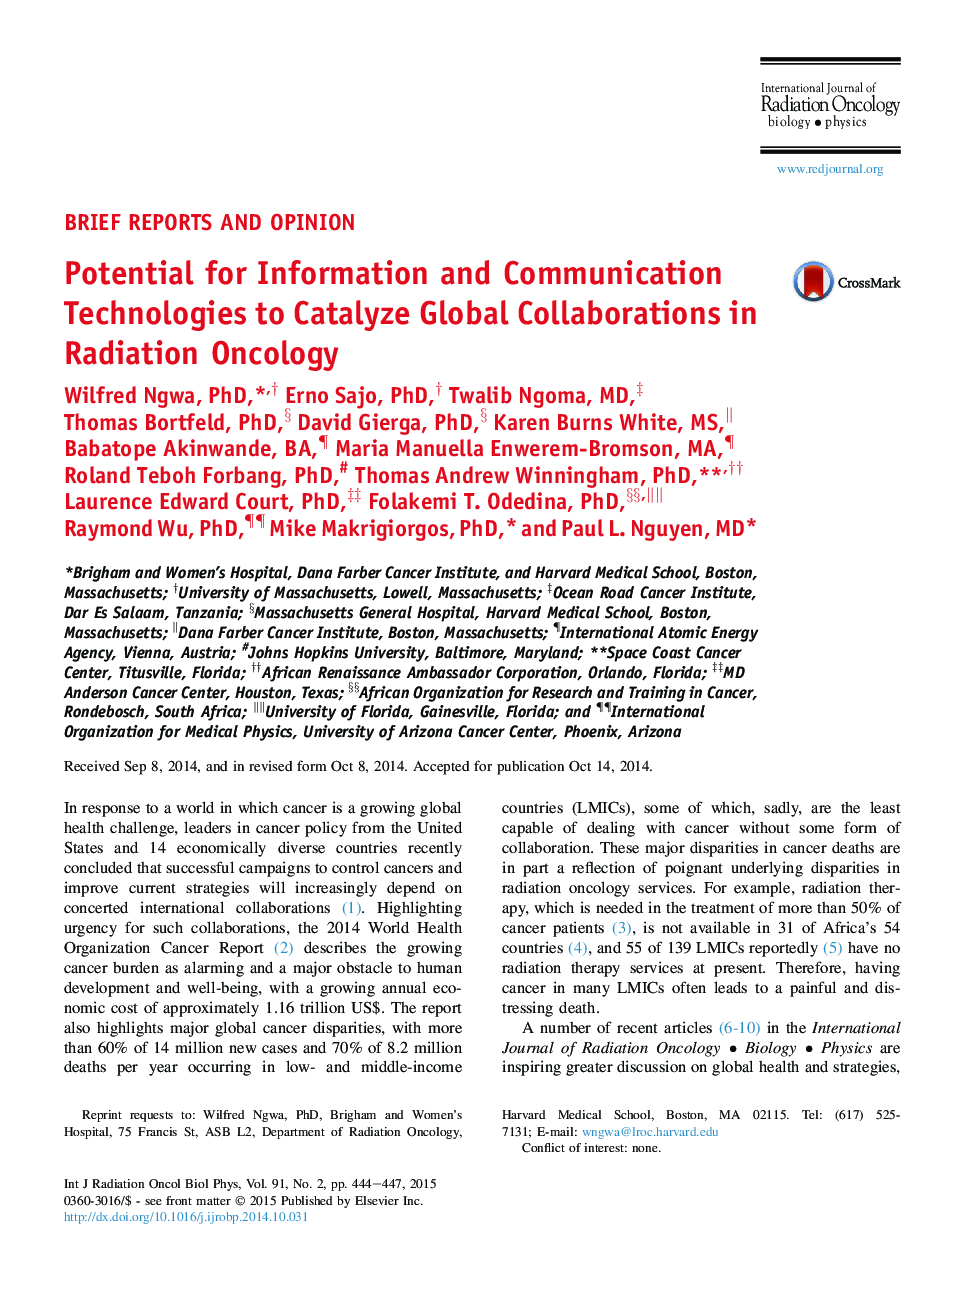 Potential for Information and Communication Technologies to Catalyze Global Collaborations in Radiation Oncology